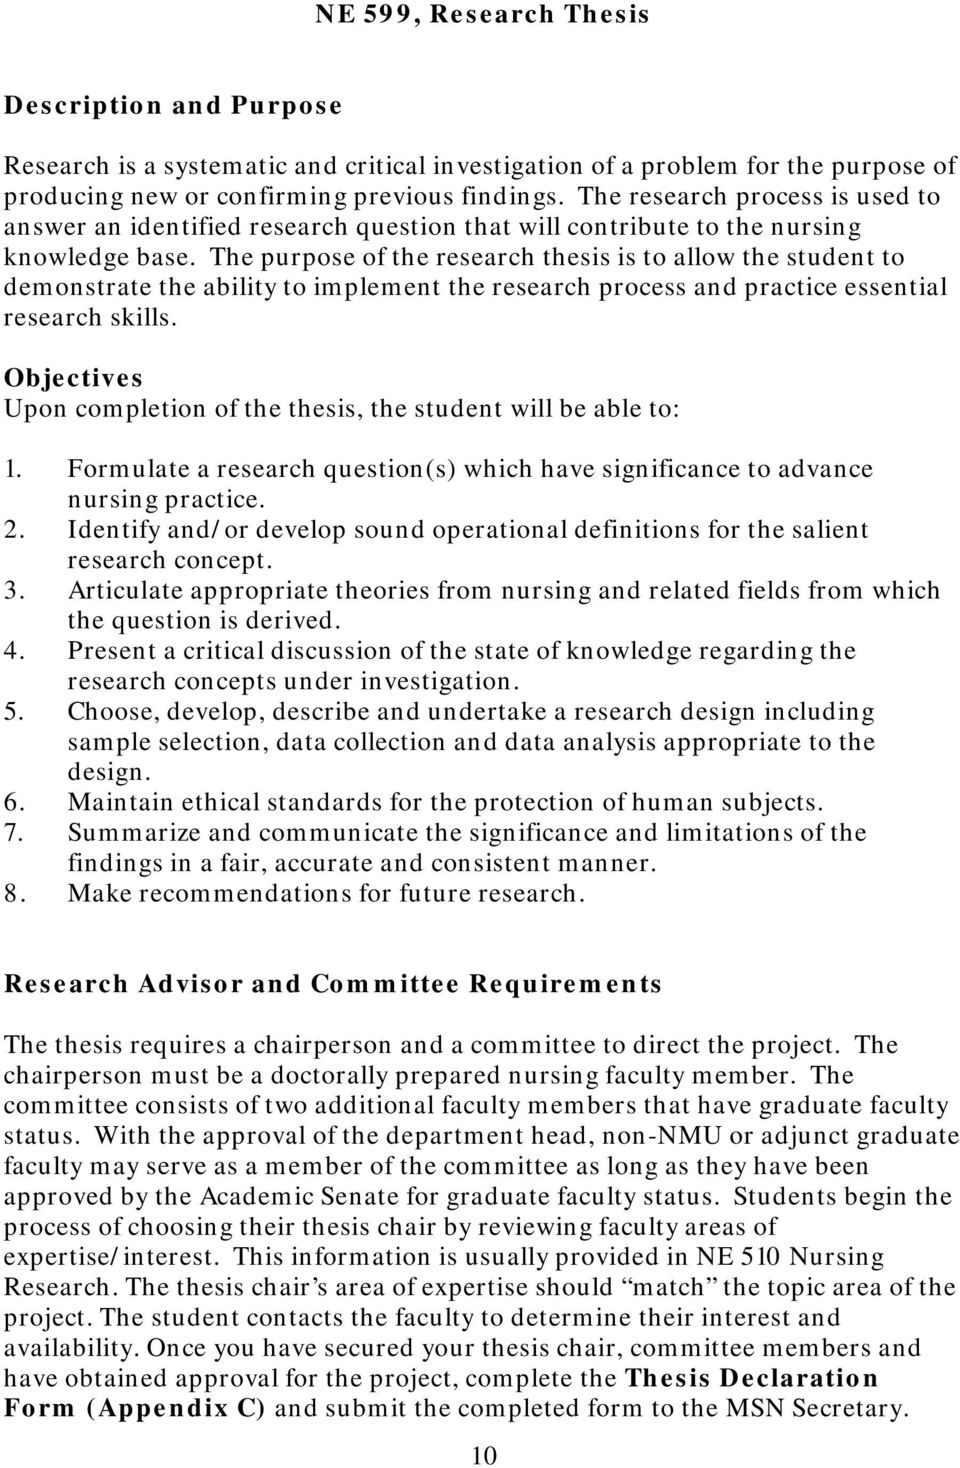 The purpose of the research thesis is to allow the student to demonstrate the ability to implement the research process and practice essential research skills.